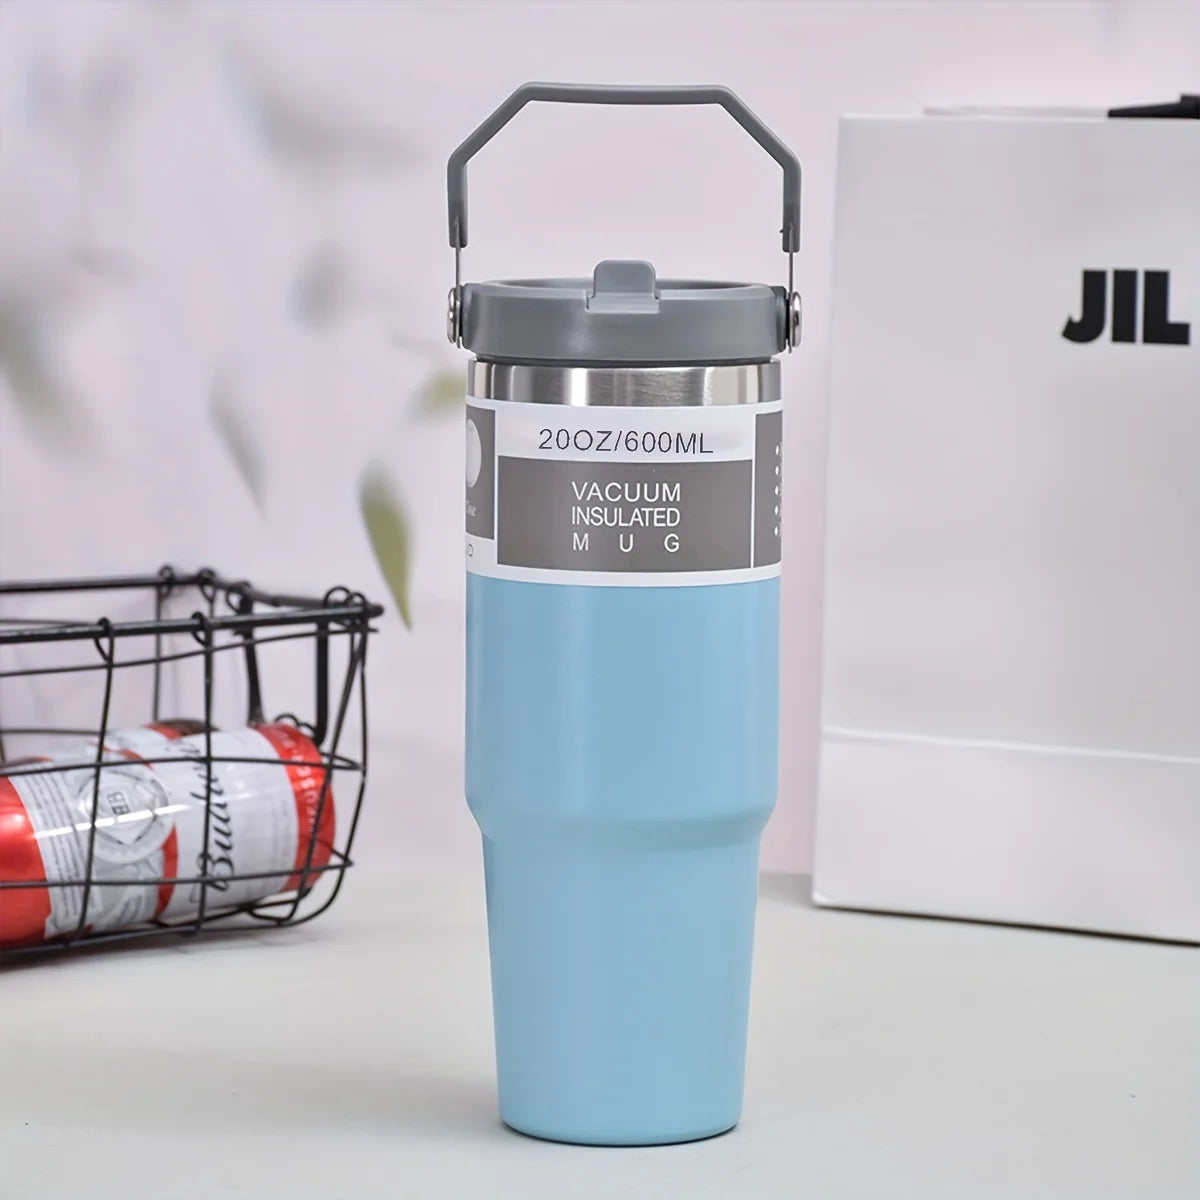 Vacuum-insulated stainless steel tumbler in light blue color, with a handle, placed on a table alongside a wire basket and a white box